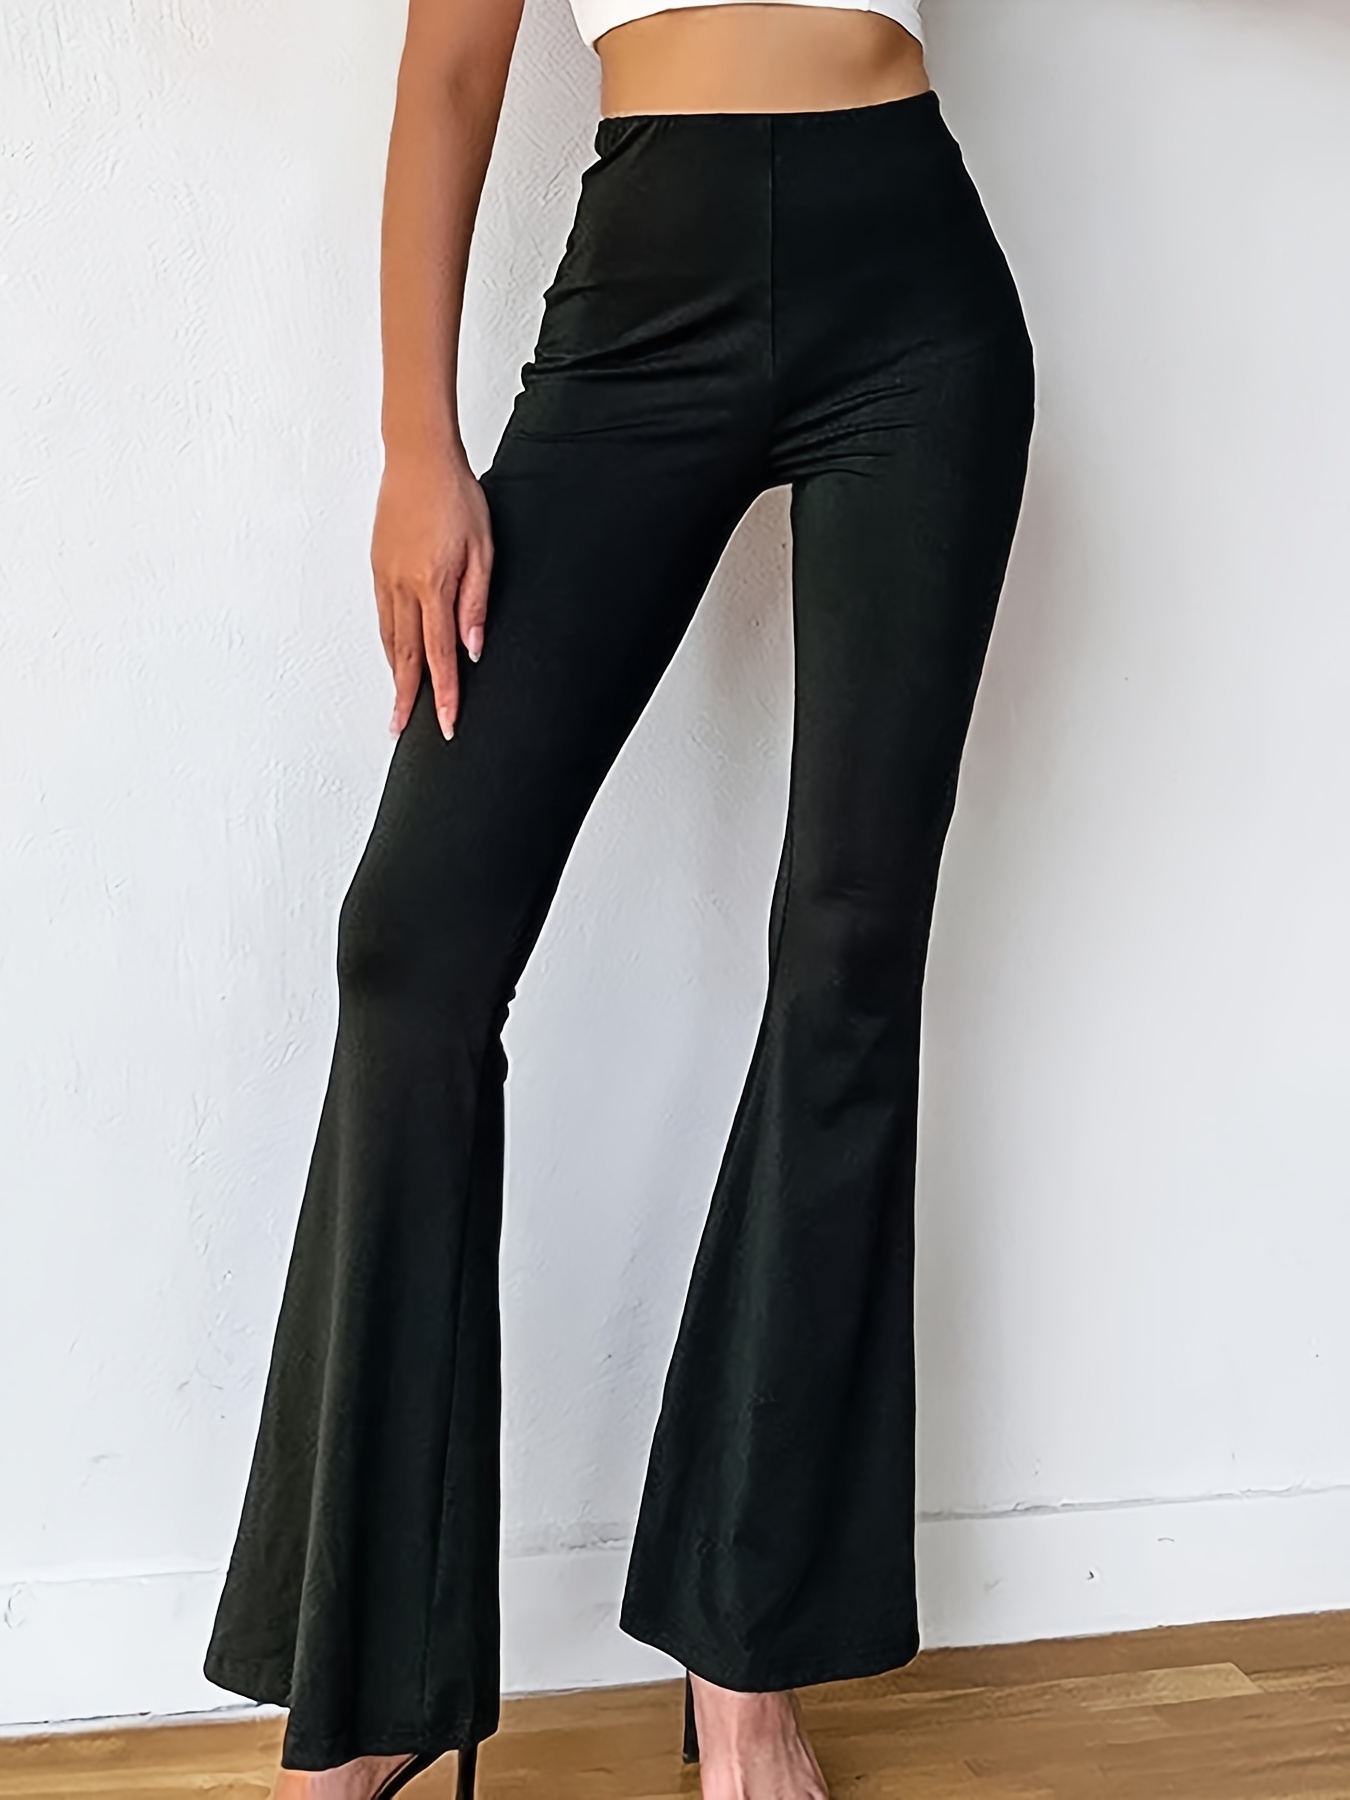 High Waist Mesh Forbidden Pants, Sexy Pants For Club, Party, Women's  Clothing